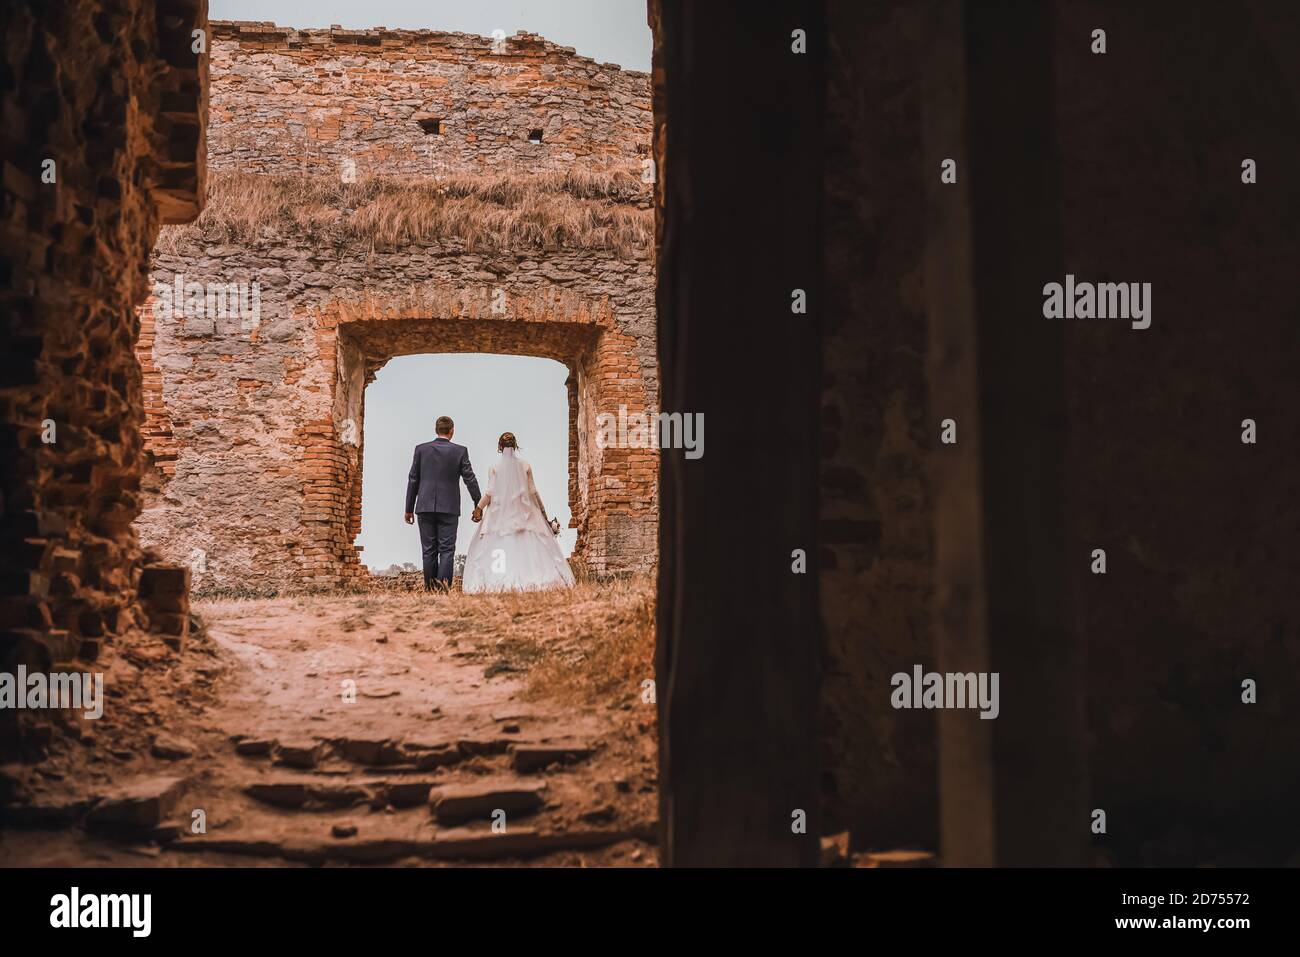 bride and groom are holding hands against the backdrop of brick ruins Stock Photo